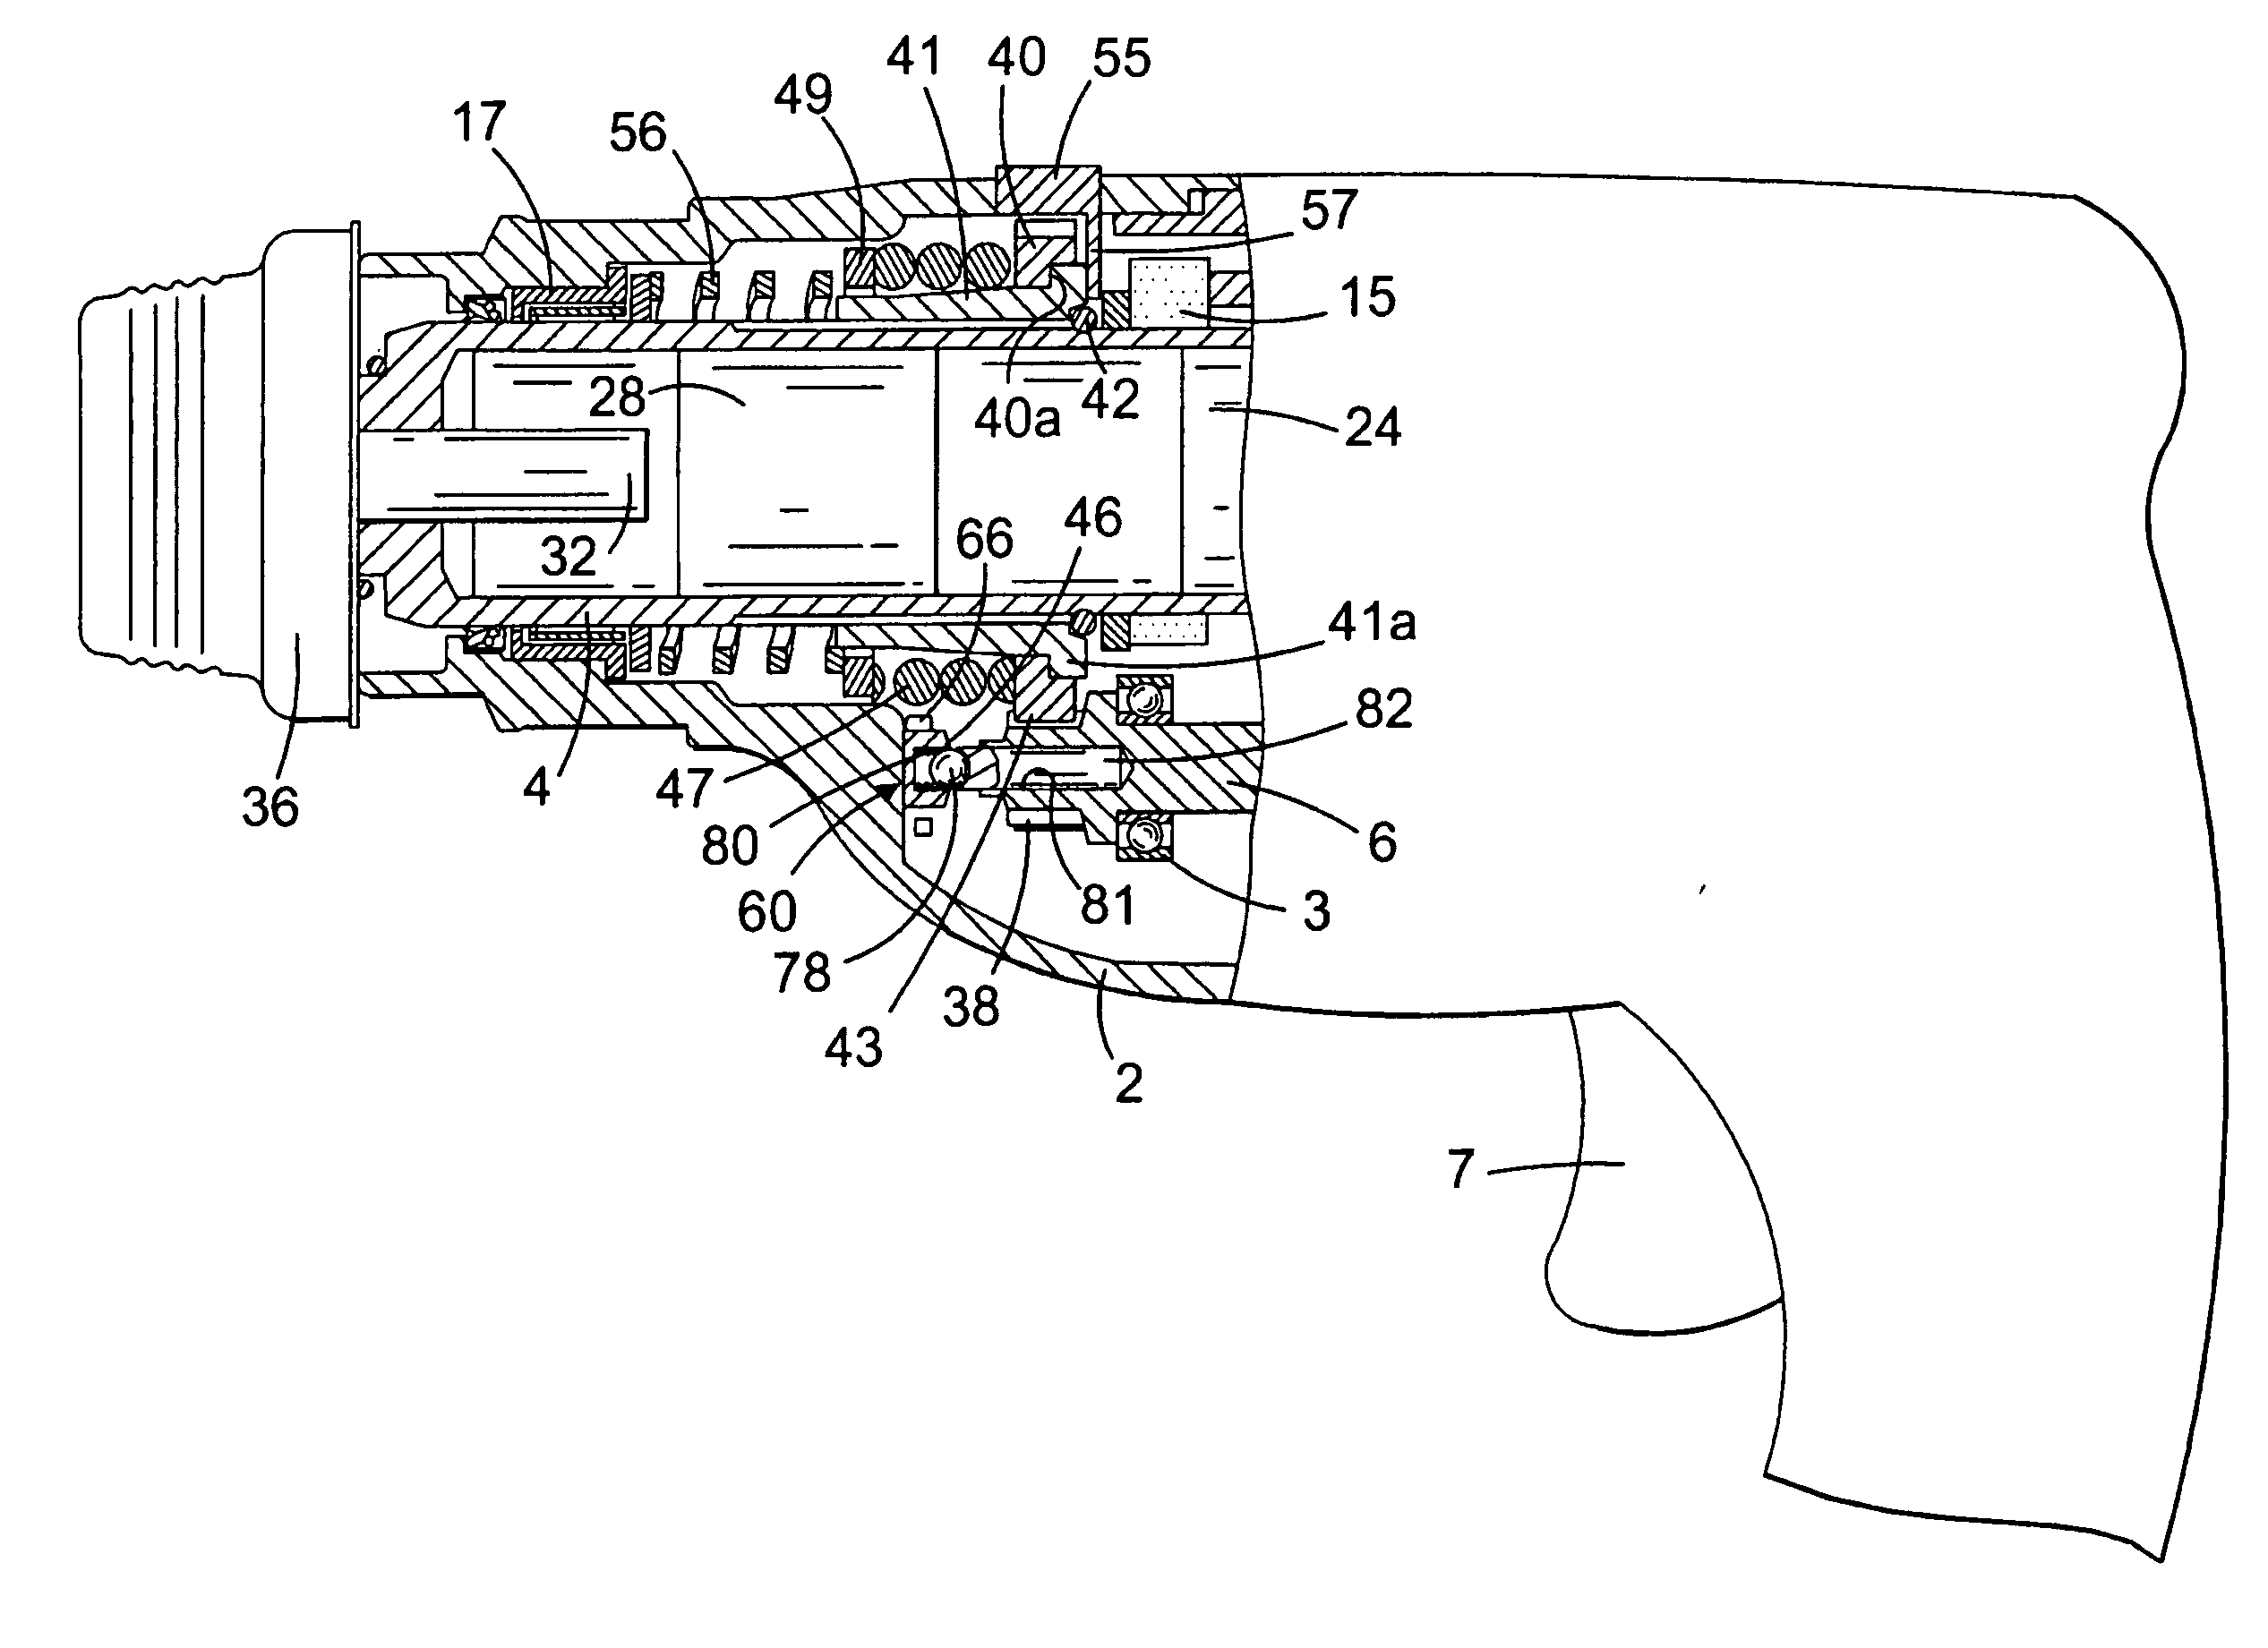 Rotary spindle for power tool and power tool incorporating such spindle